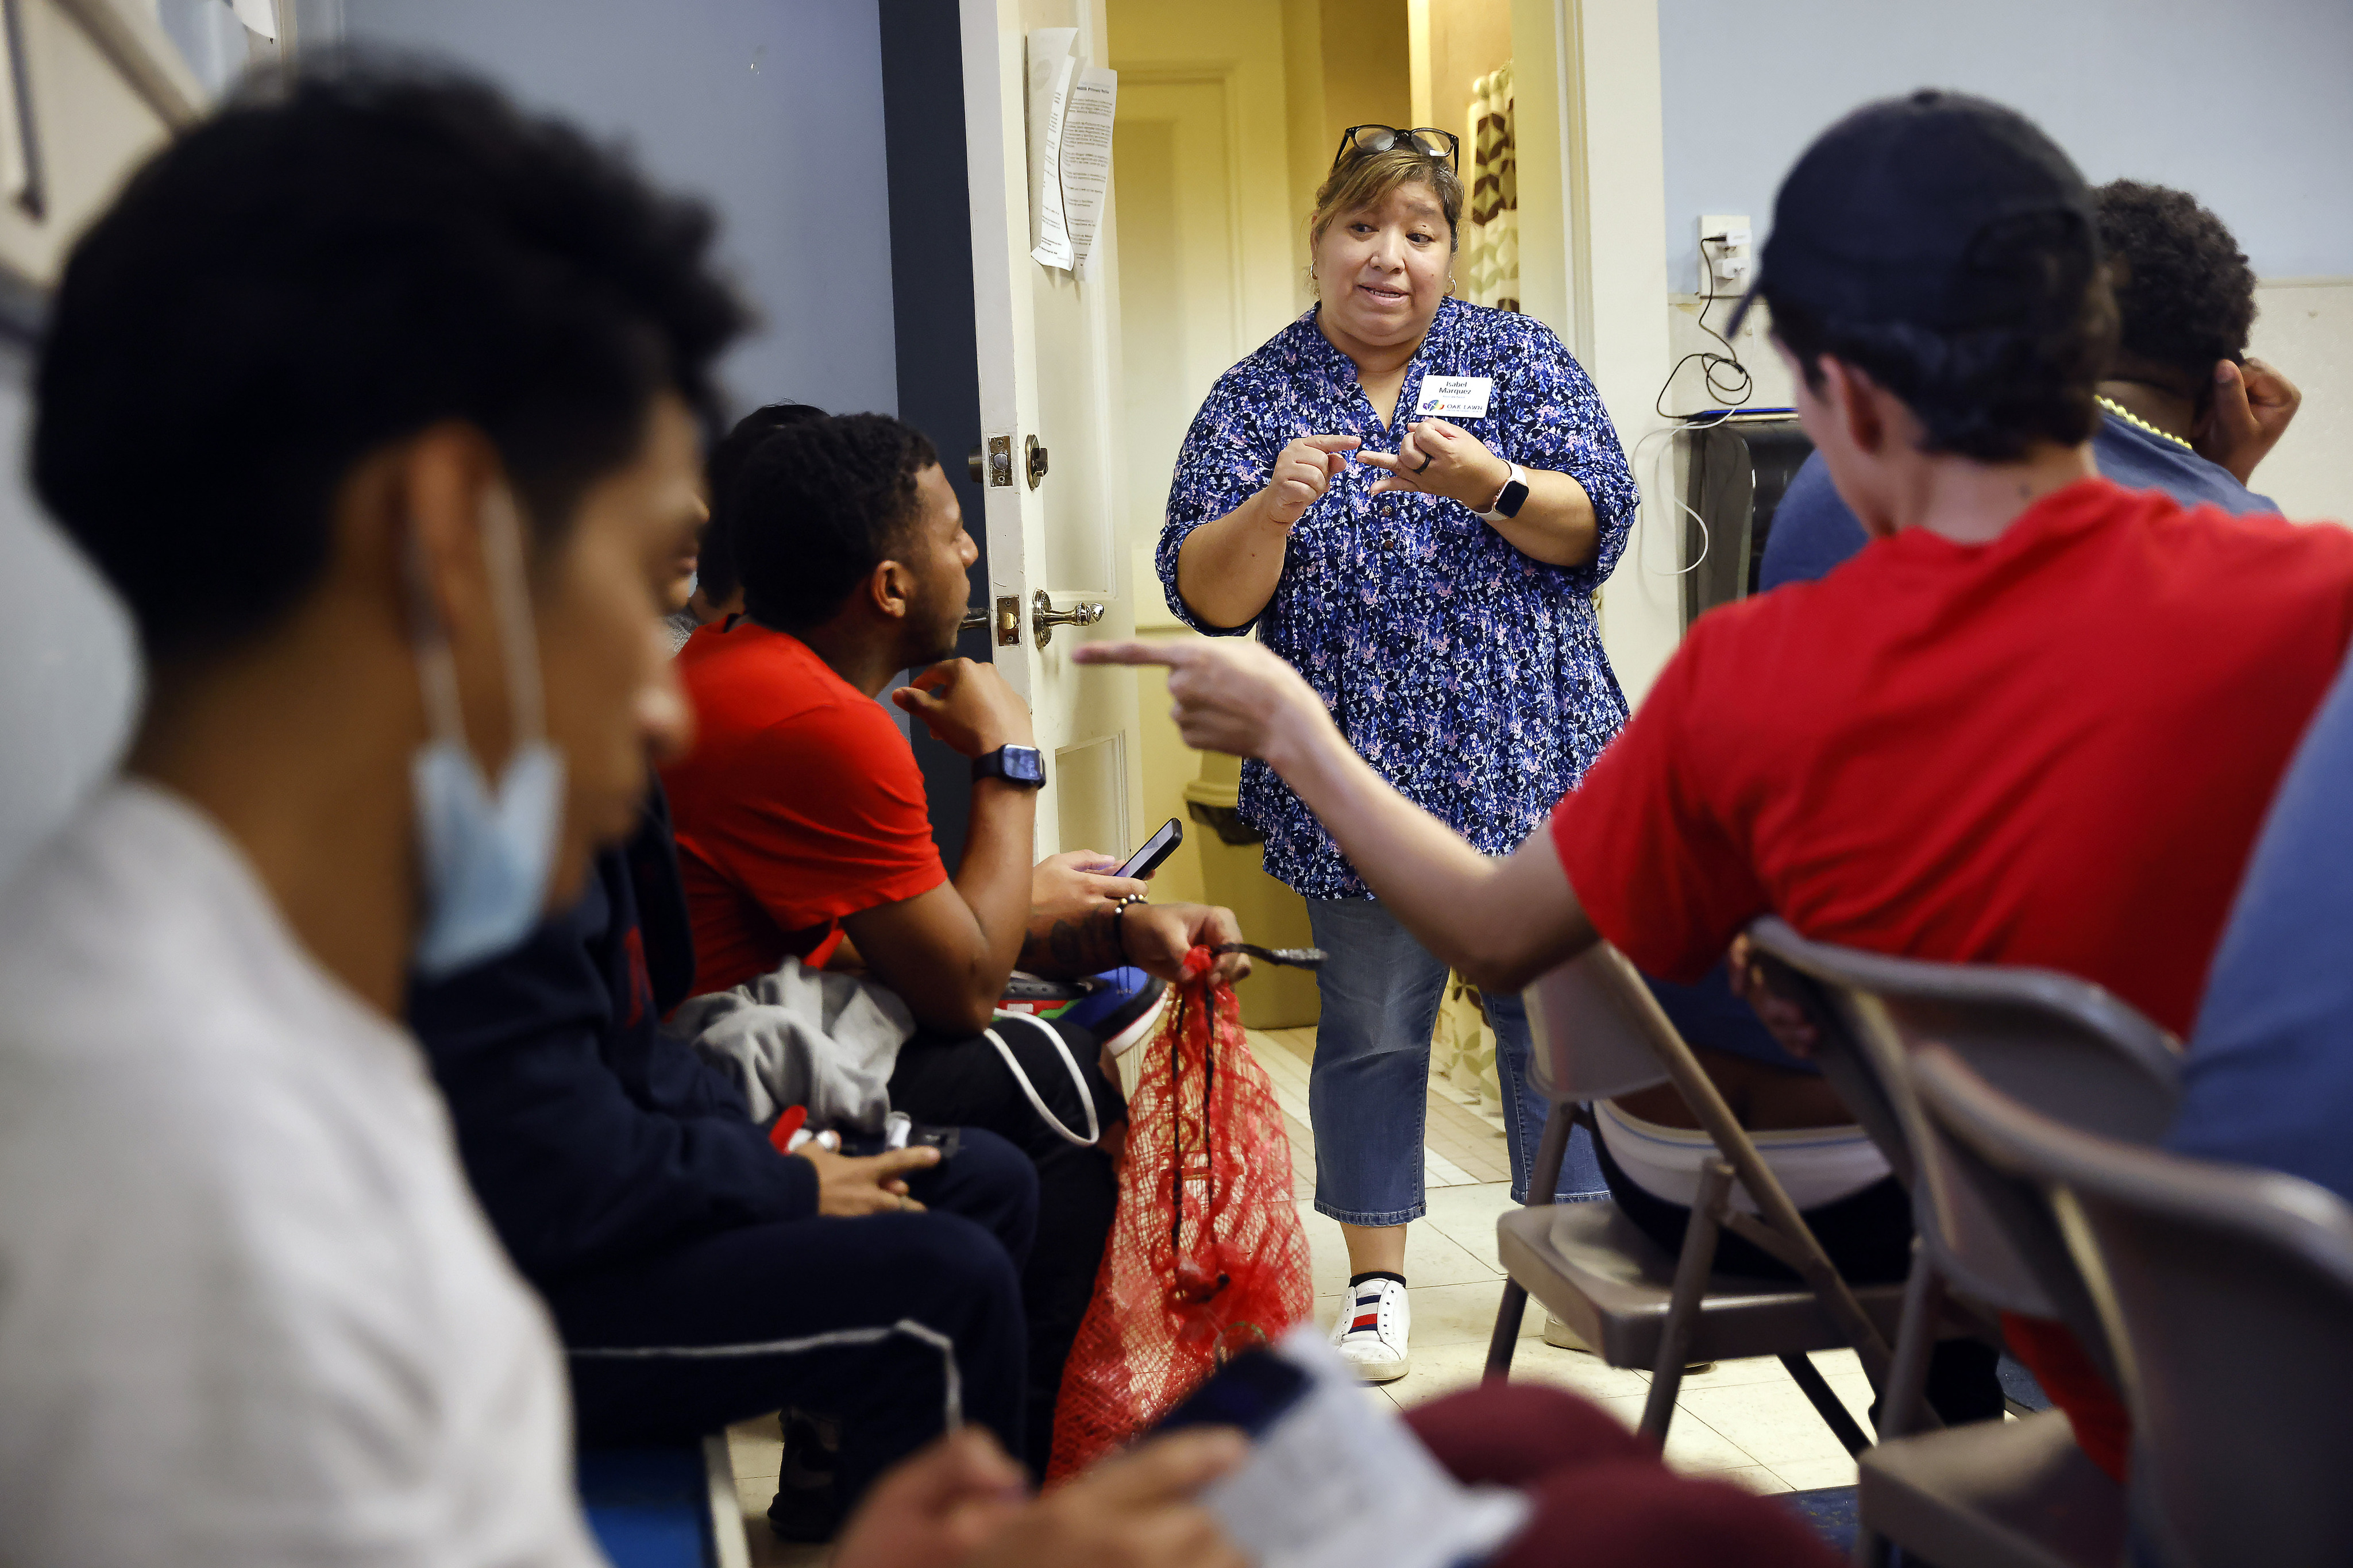 Communities of faith welcome migrants caught in polarized immigration  debate